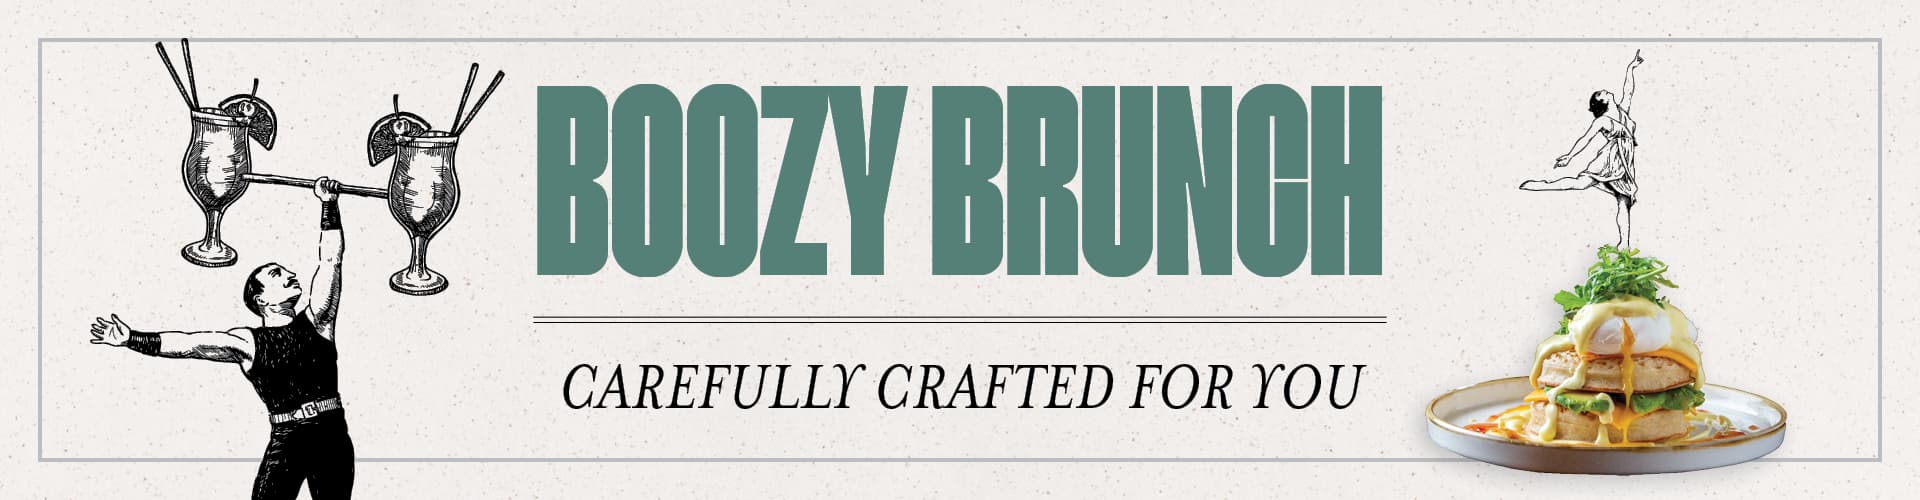 Boozy Brunch - Carefully Crafted For You